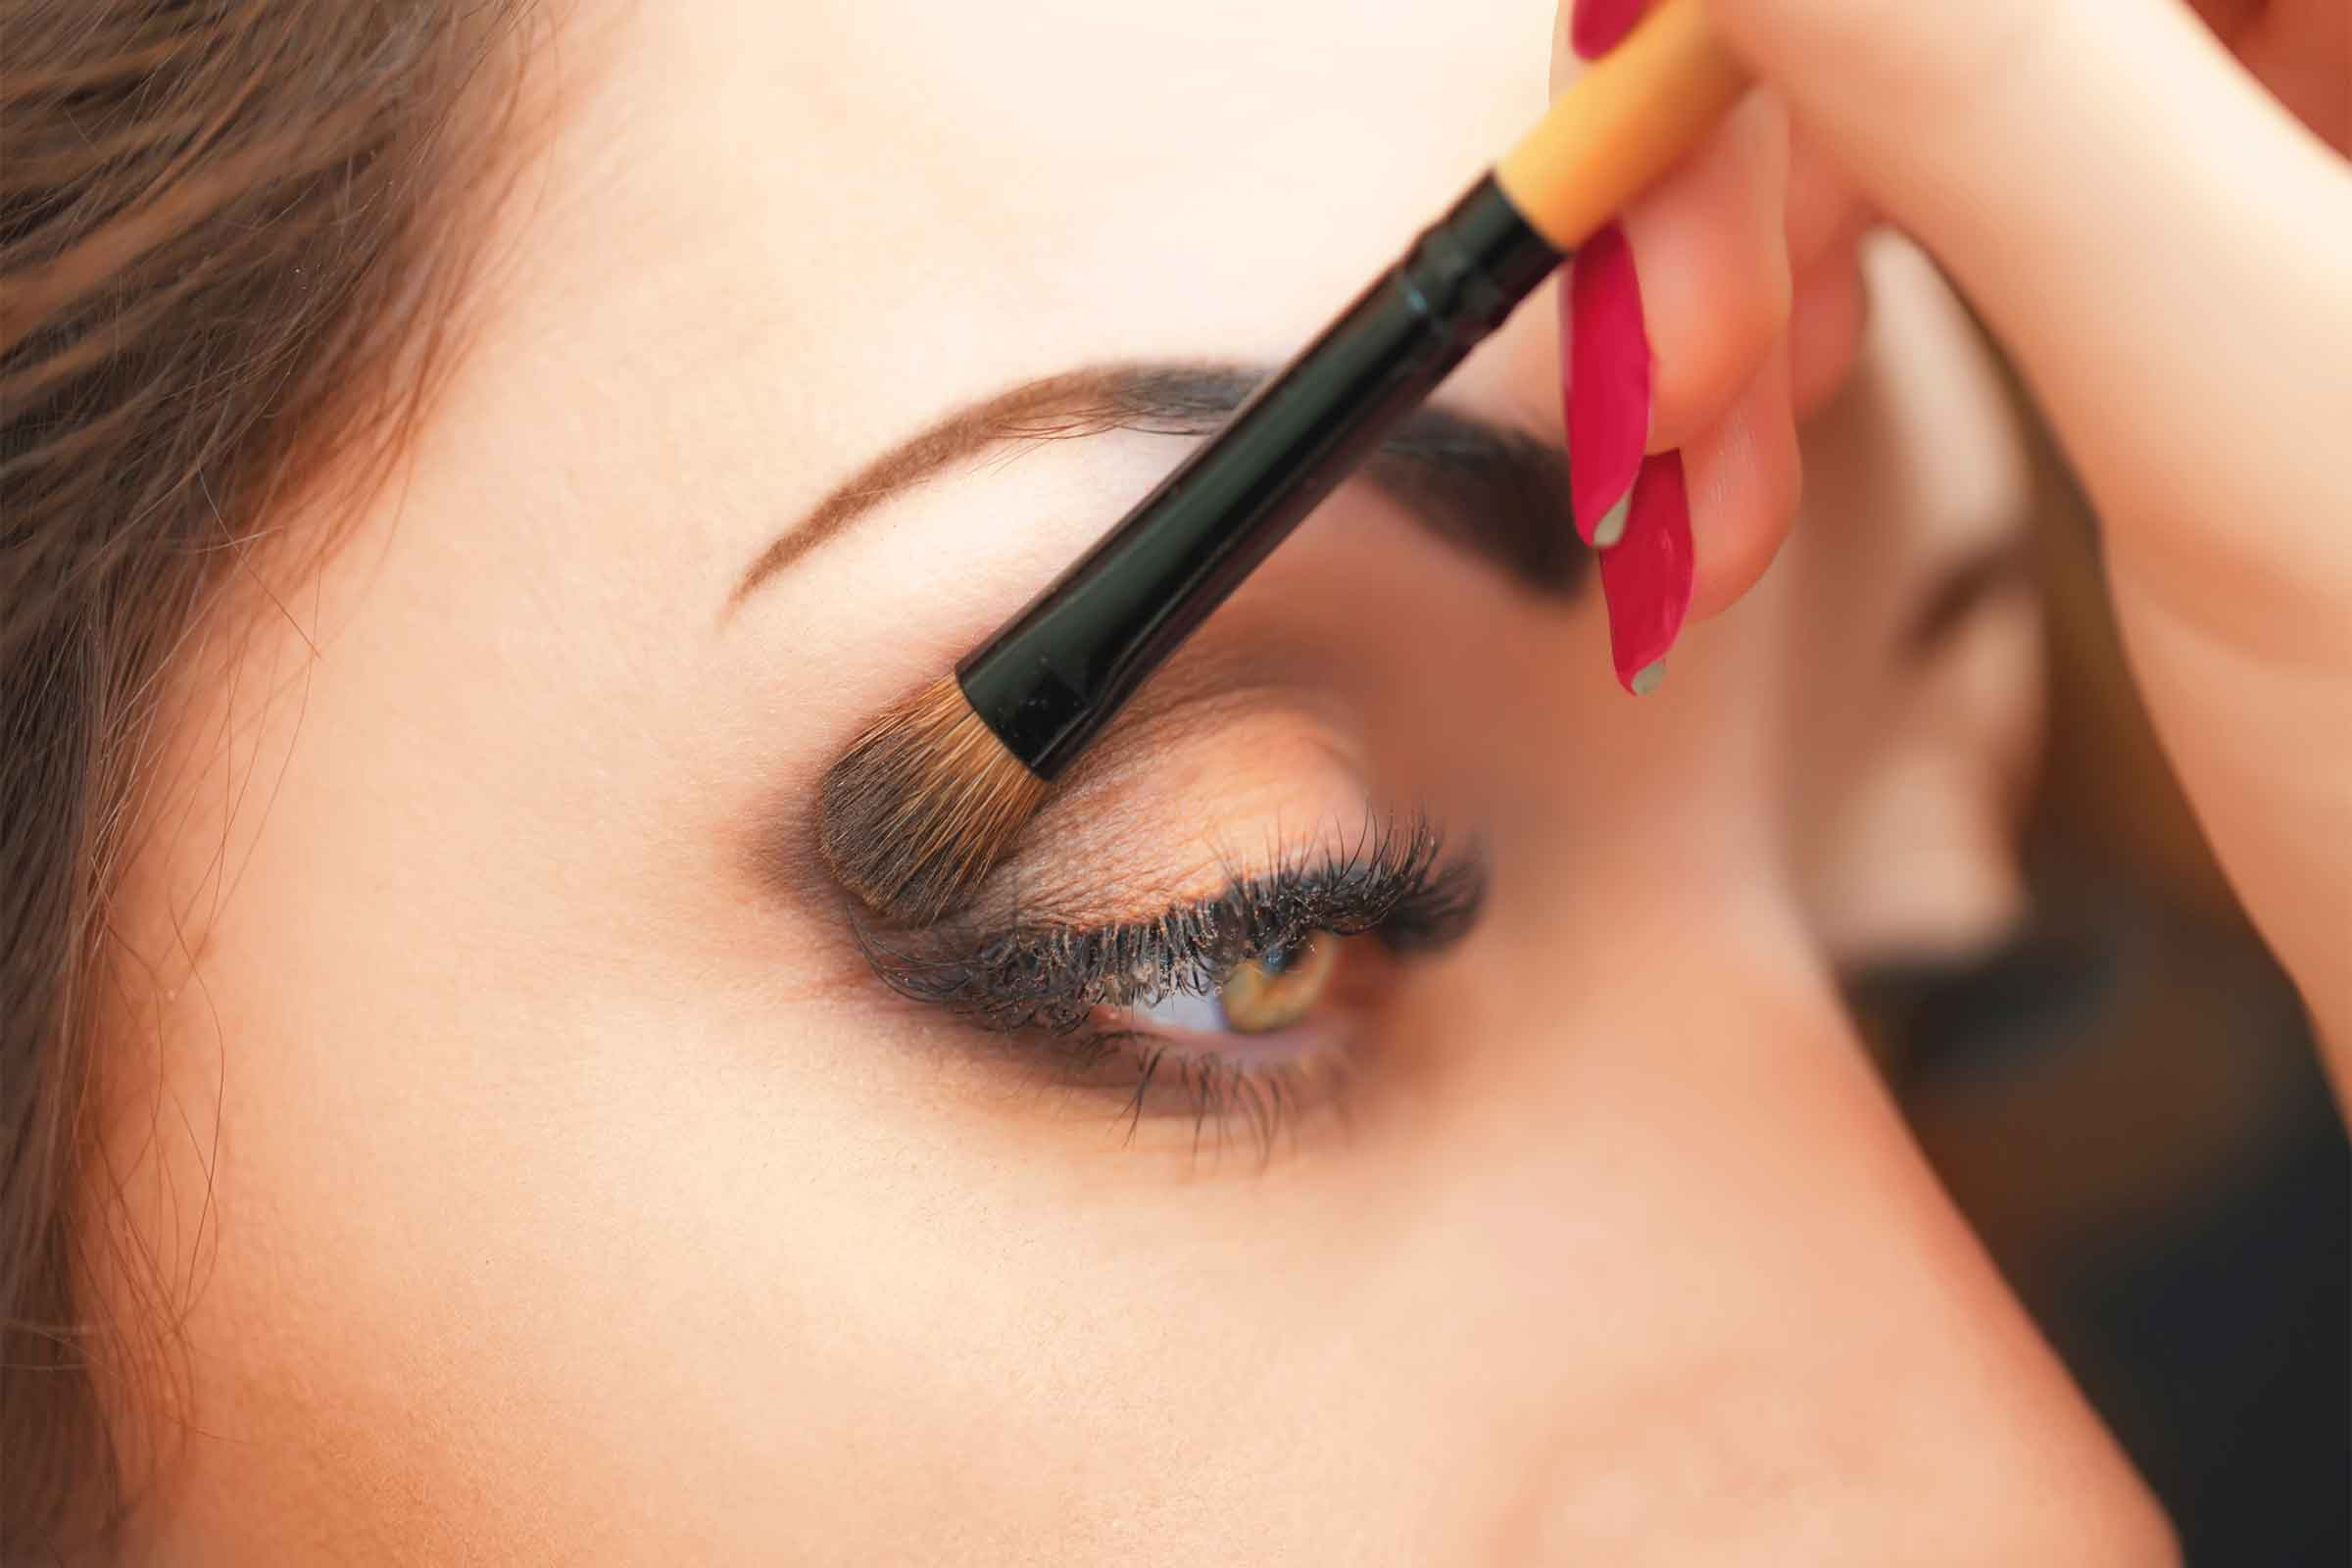 Eyes Pictures With Makeup Eye Makeup Tips 7 Ways To Make Your Eyes Pop Readers Digest